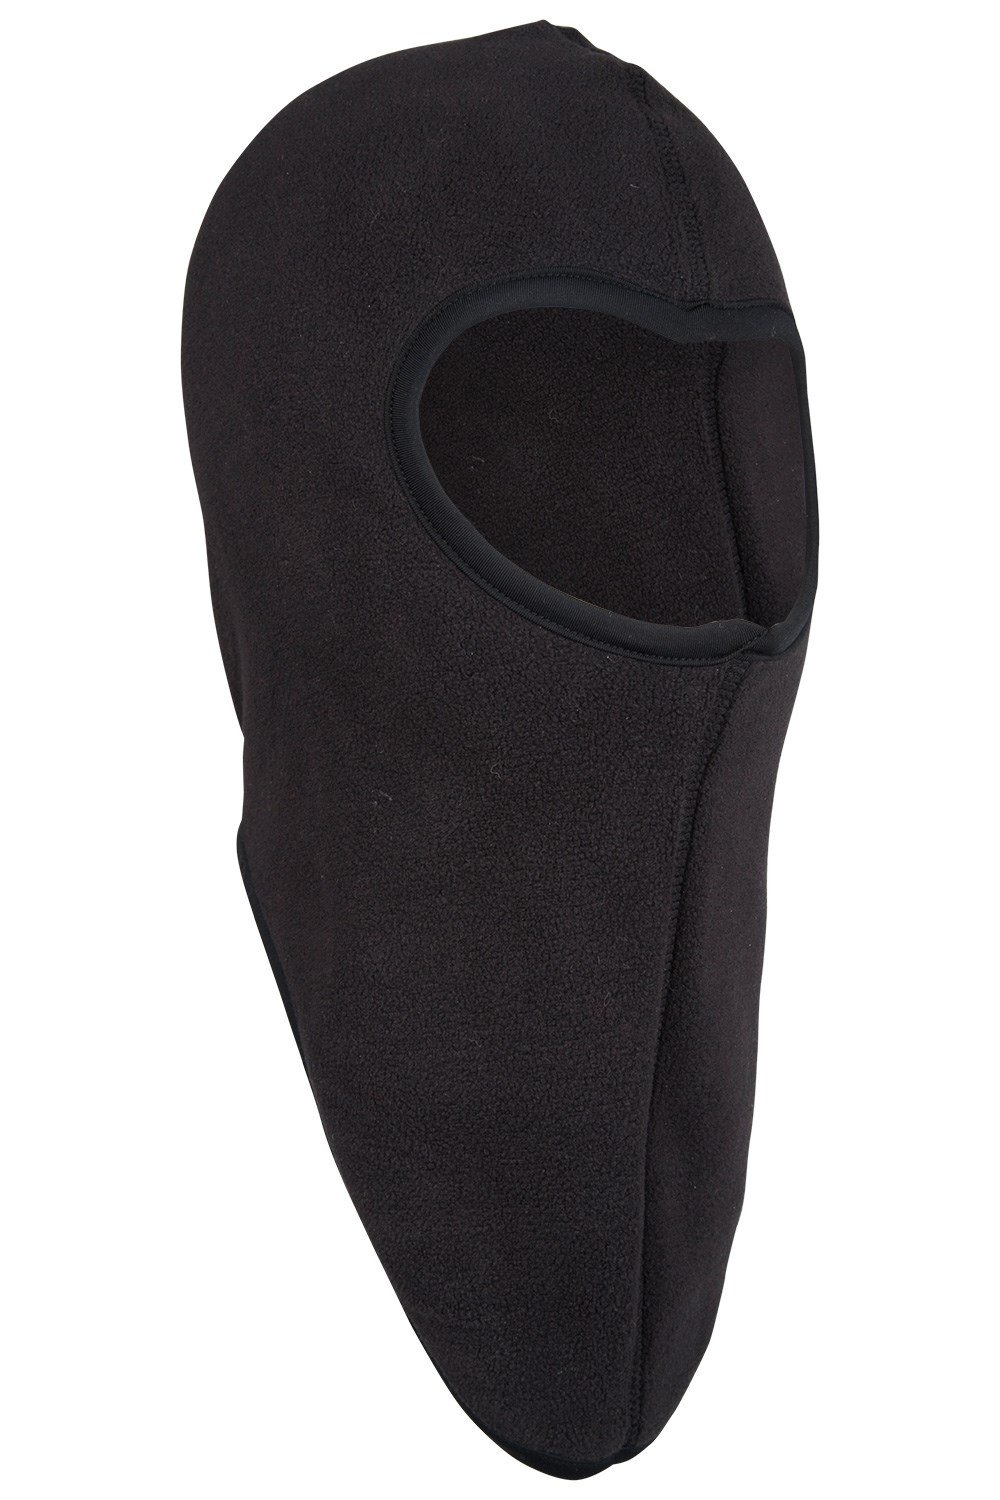 Mountain Warehouse Superstretch Fleece Balaclava in Black with Elasticated Cuff 